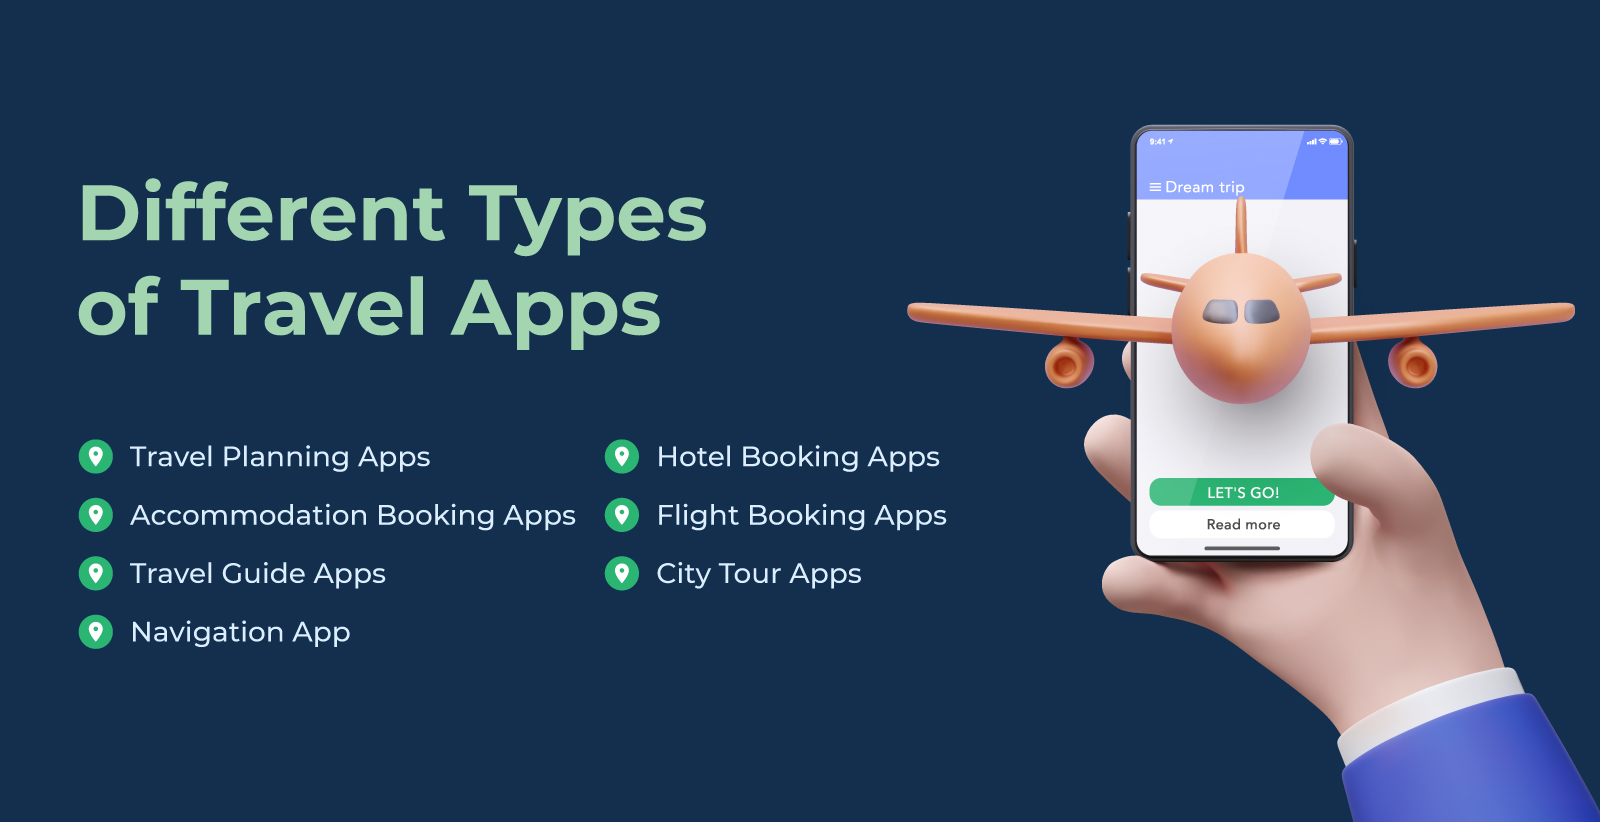 How Much Does Travel App Development Cost in 2022?